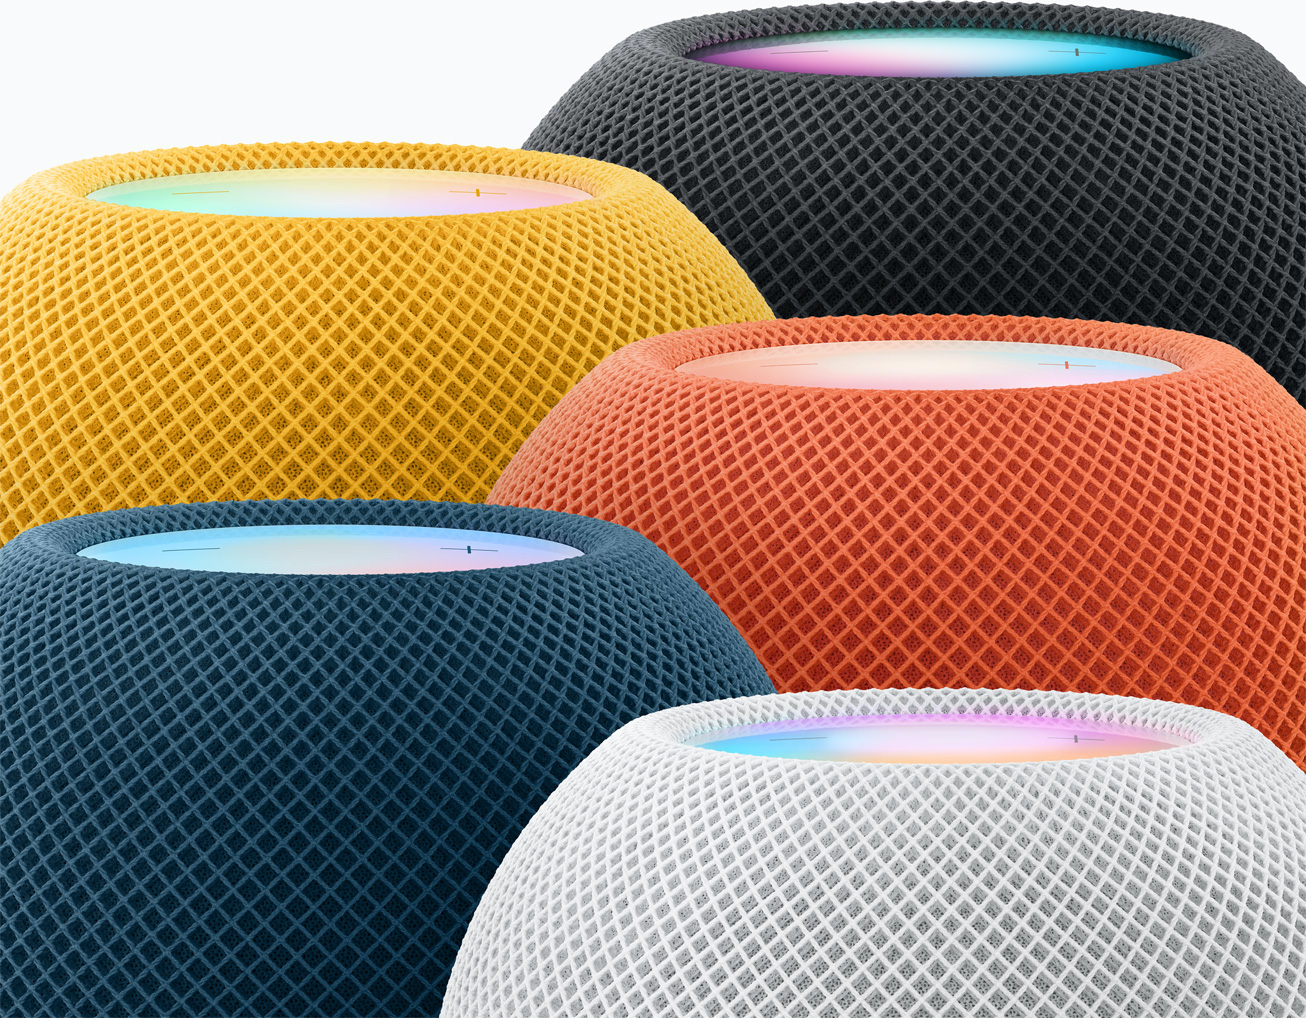 Apple launches a new color for the HomePod mini smart speaker